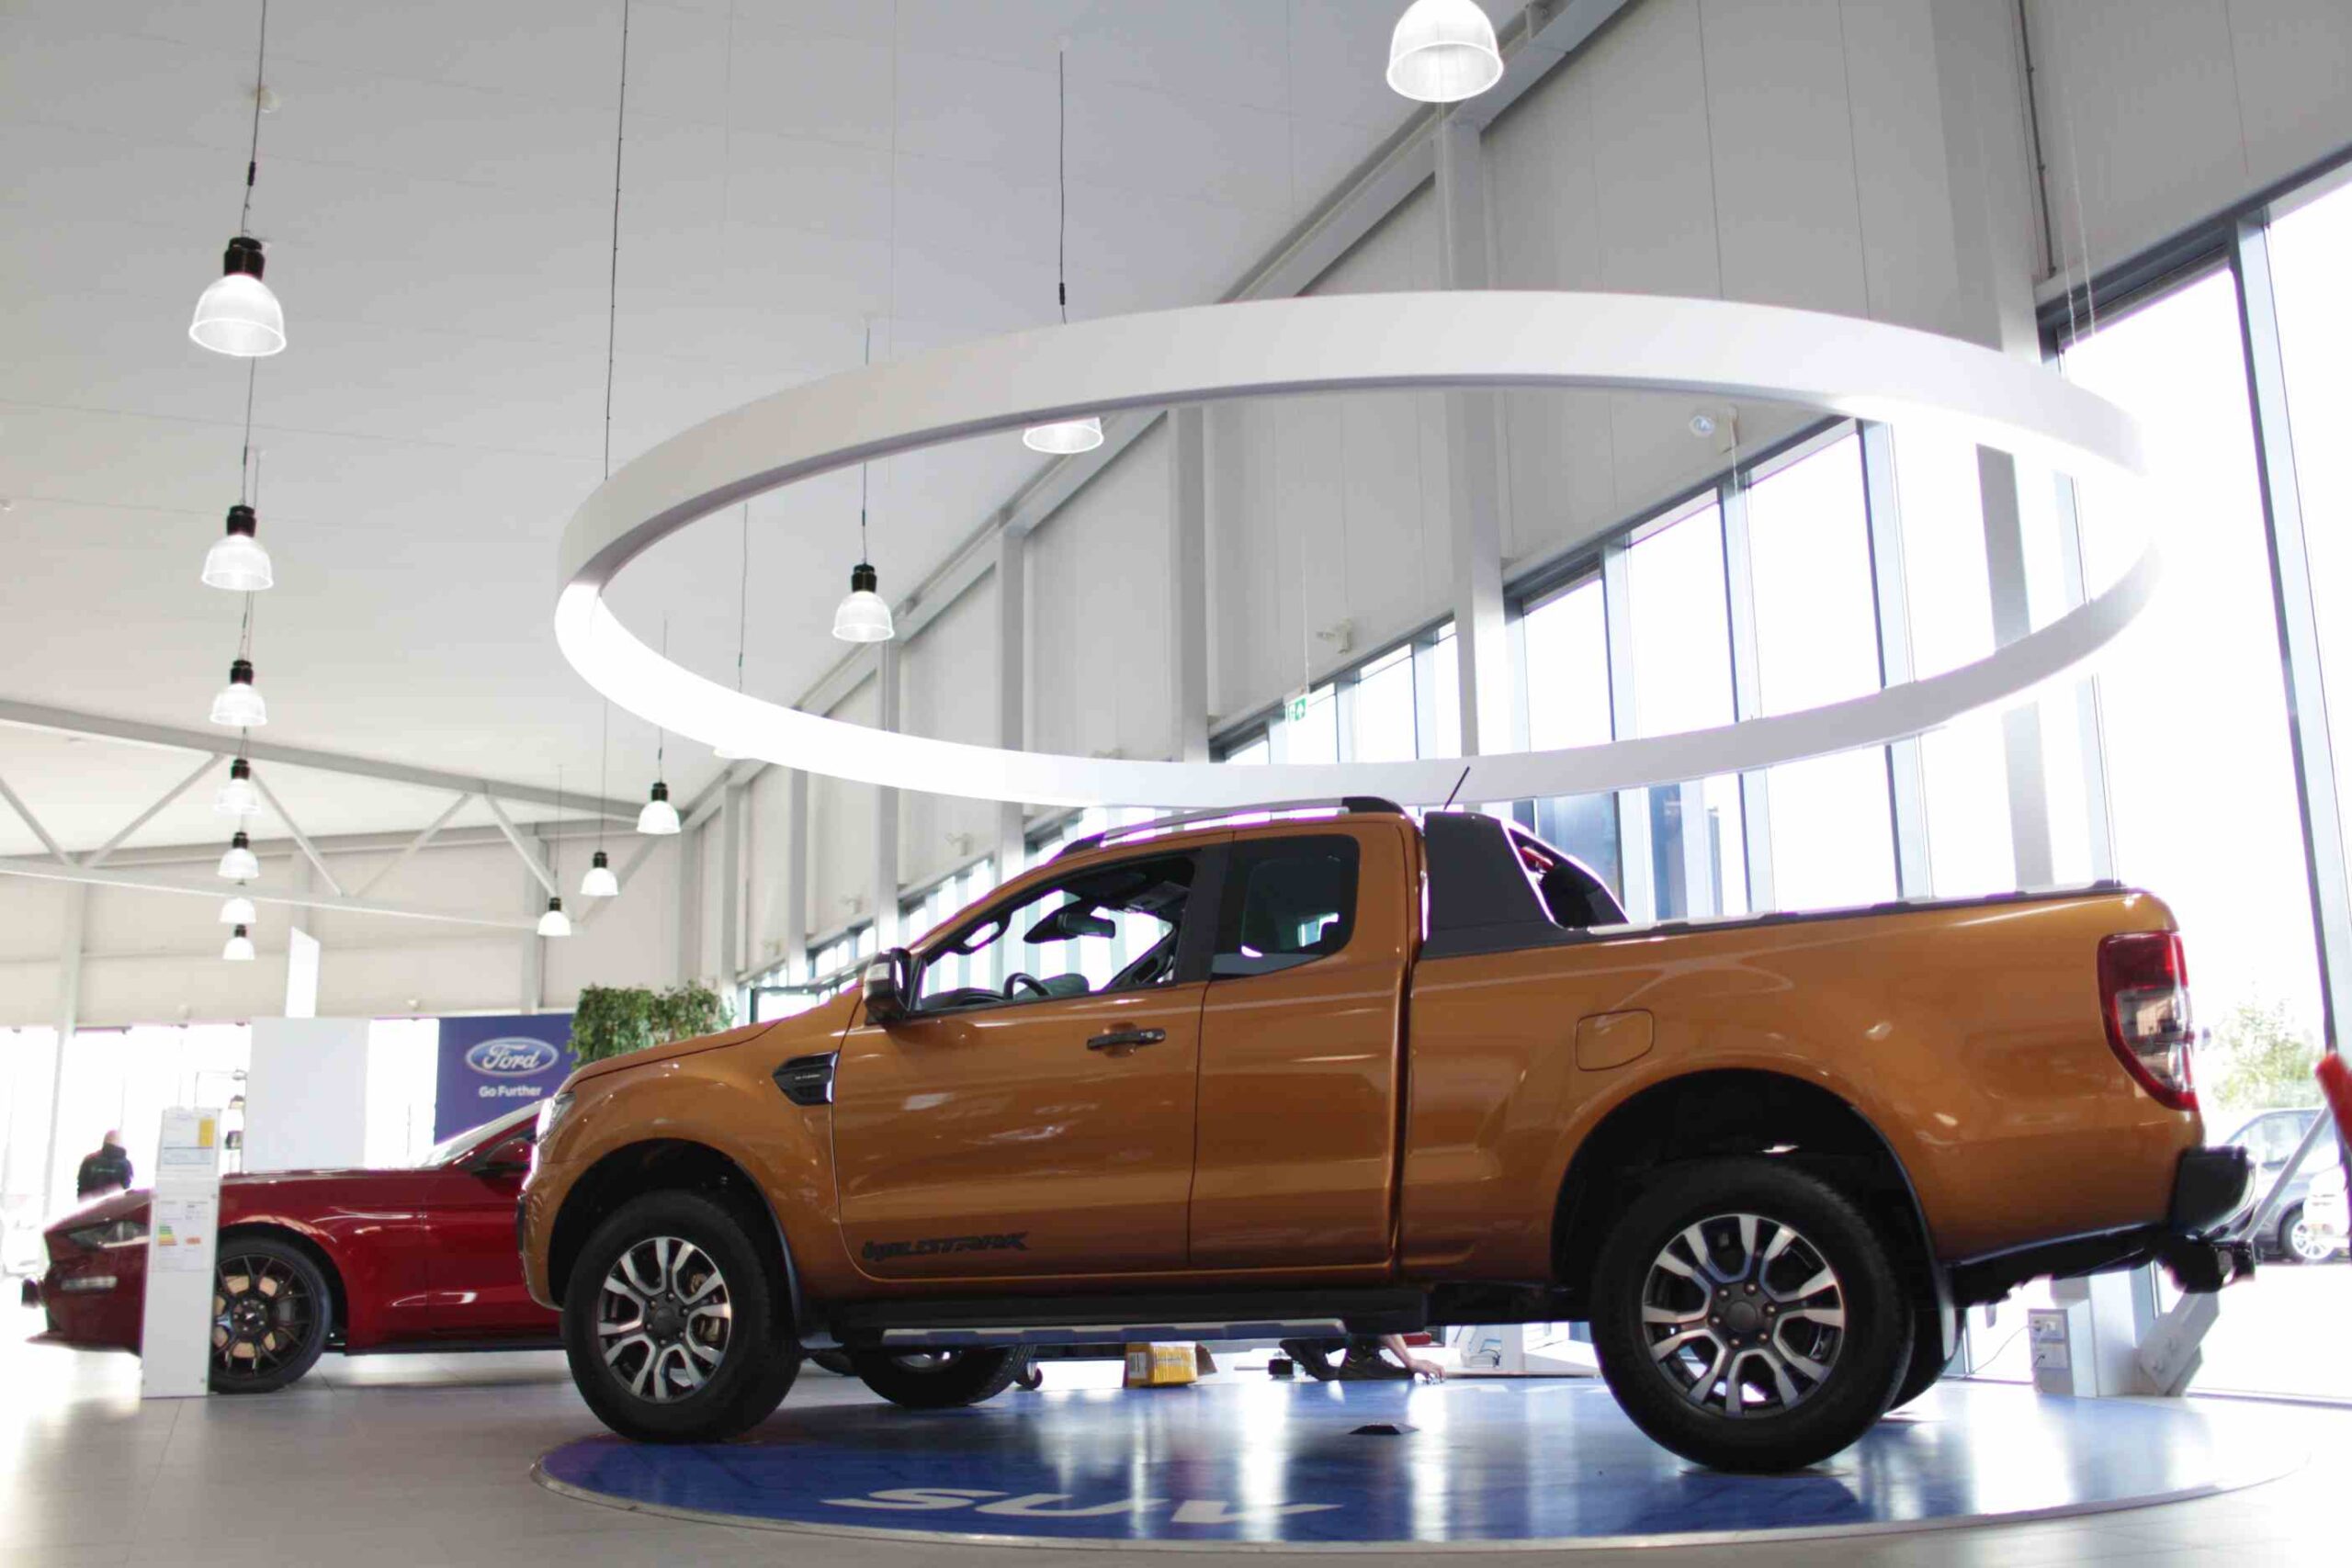 Ford ledverlichting showroom